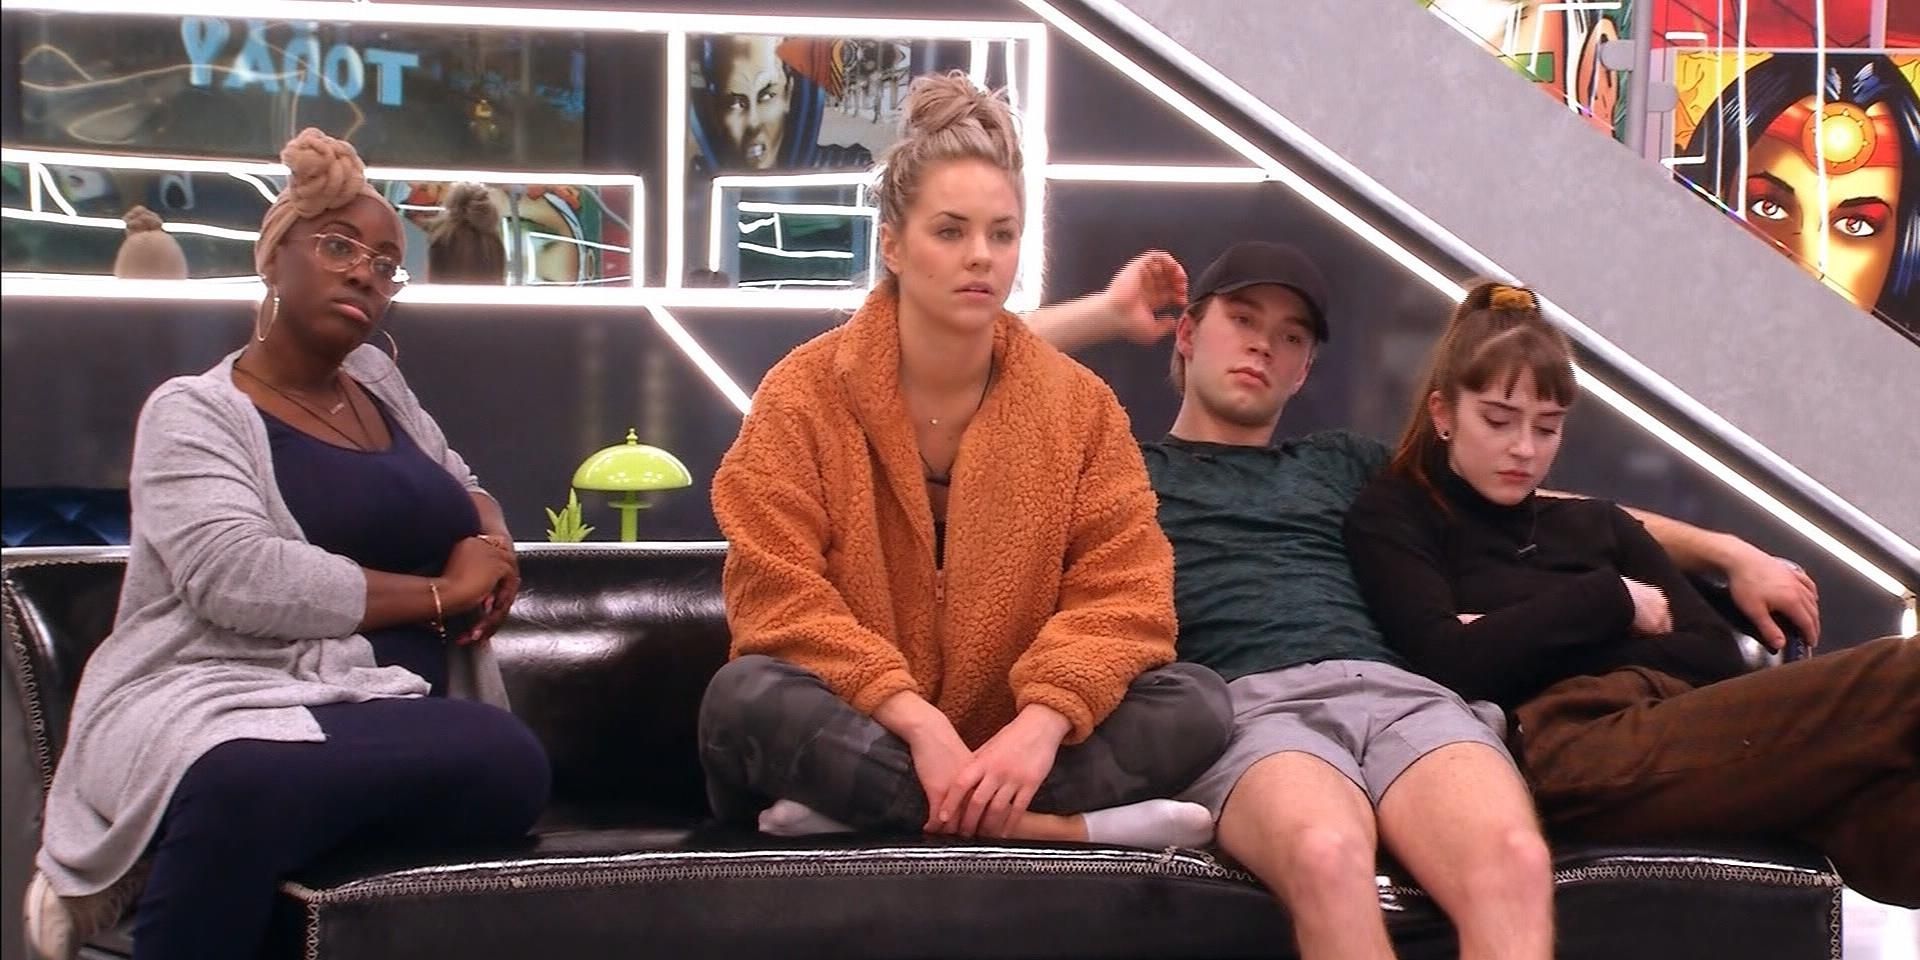 Players of Big Brother Canada sitting on a couch